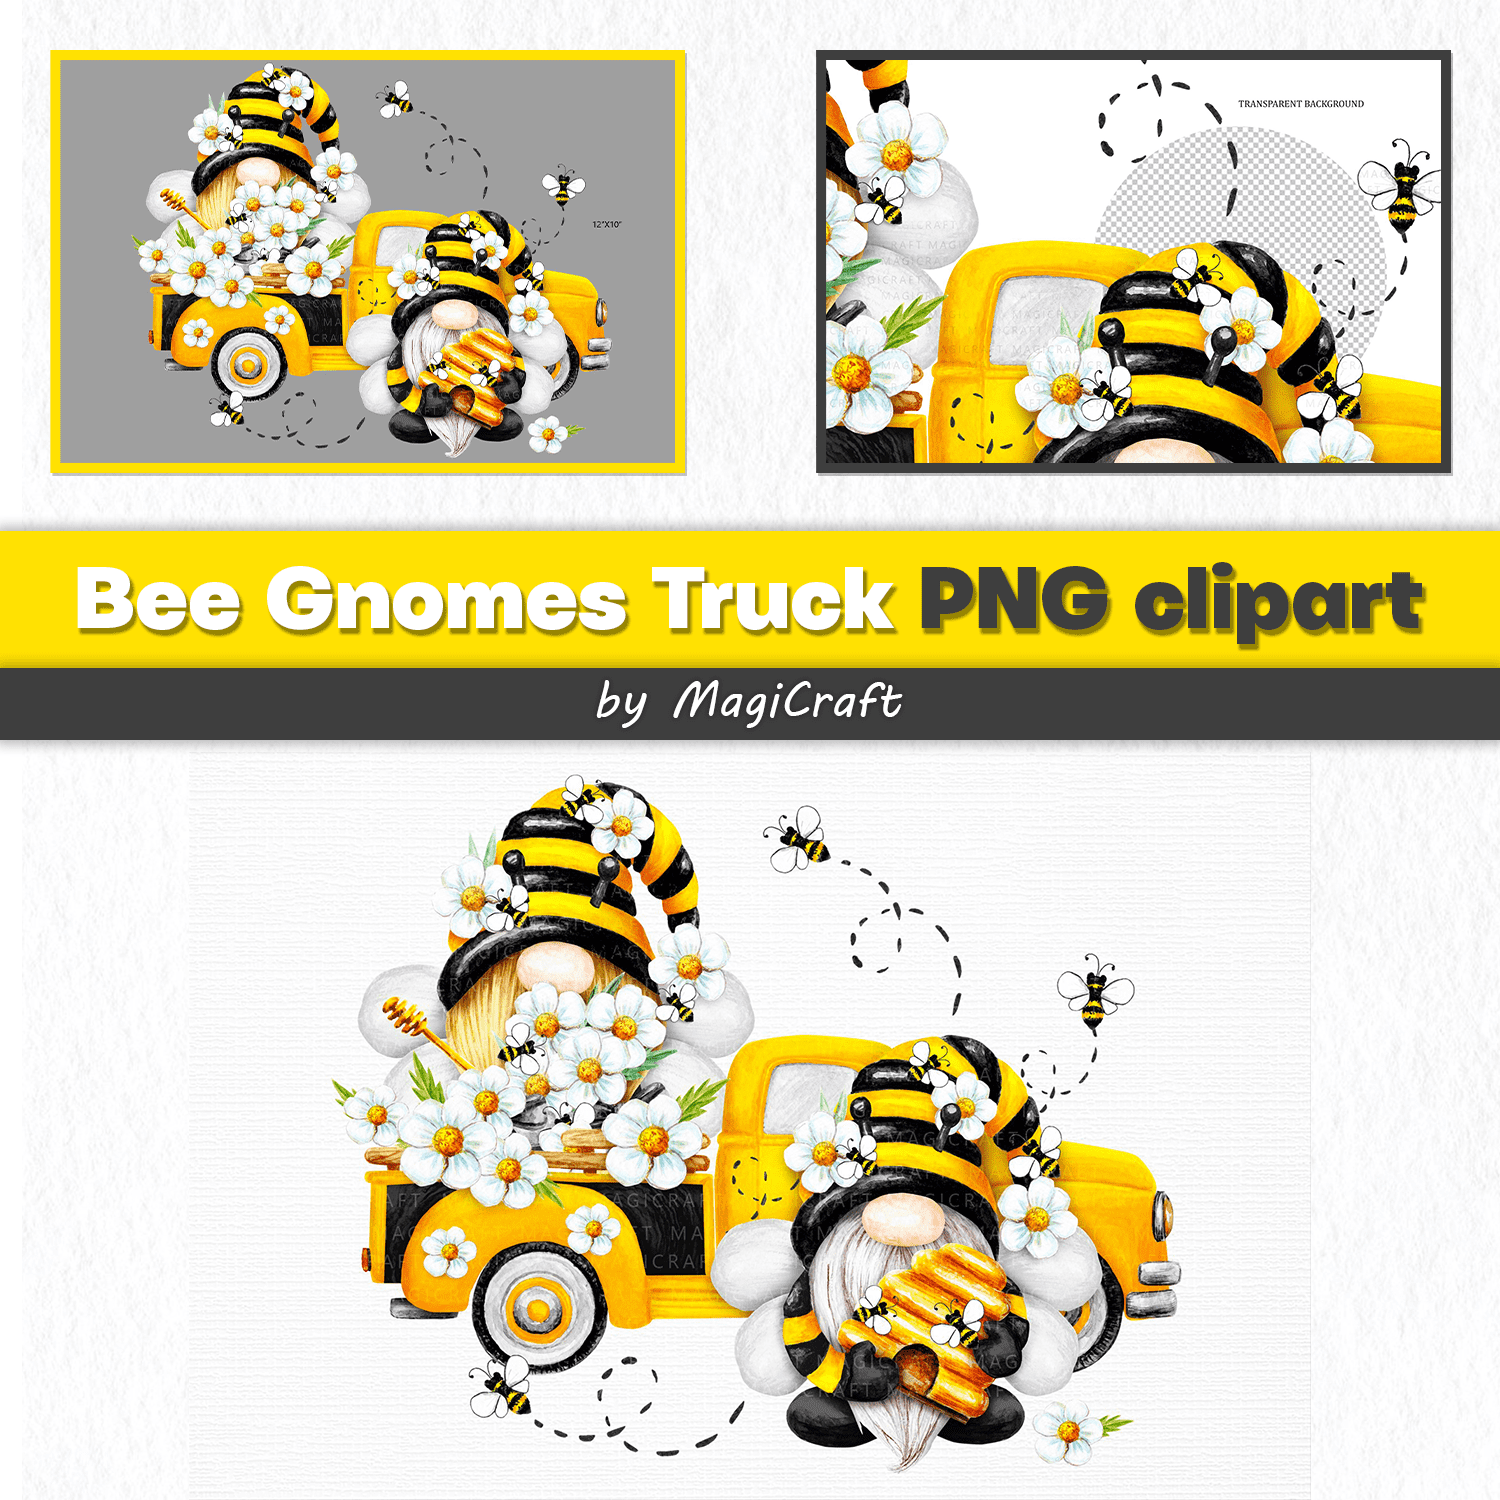 Bee gnomes truck clipart watercolor by MagiCraft.